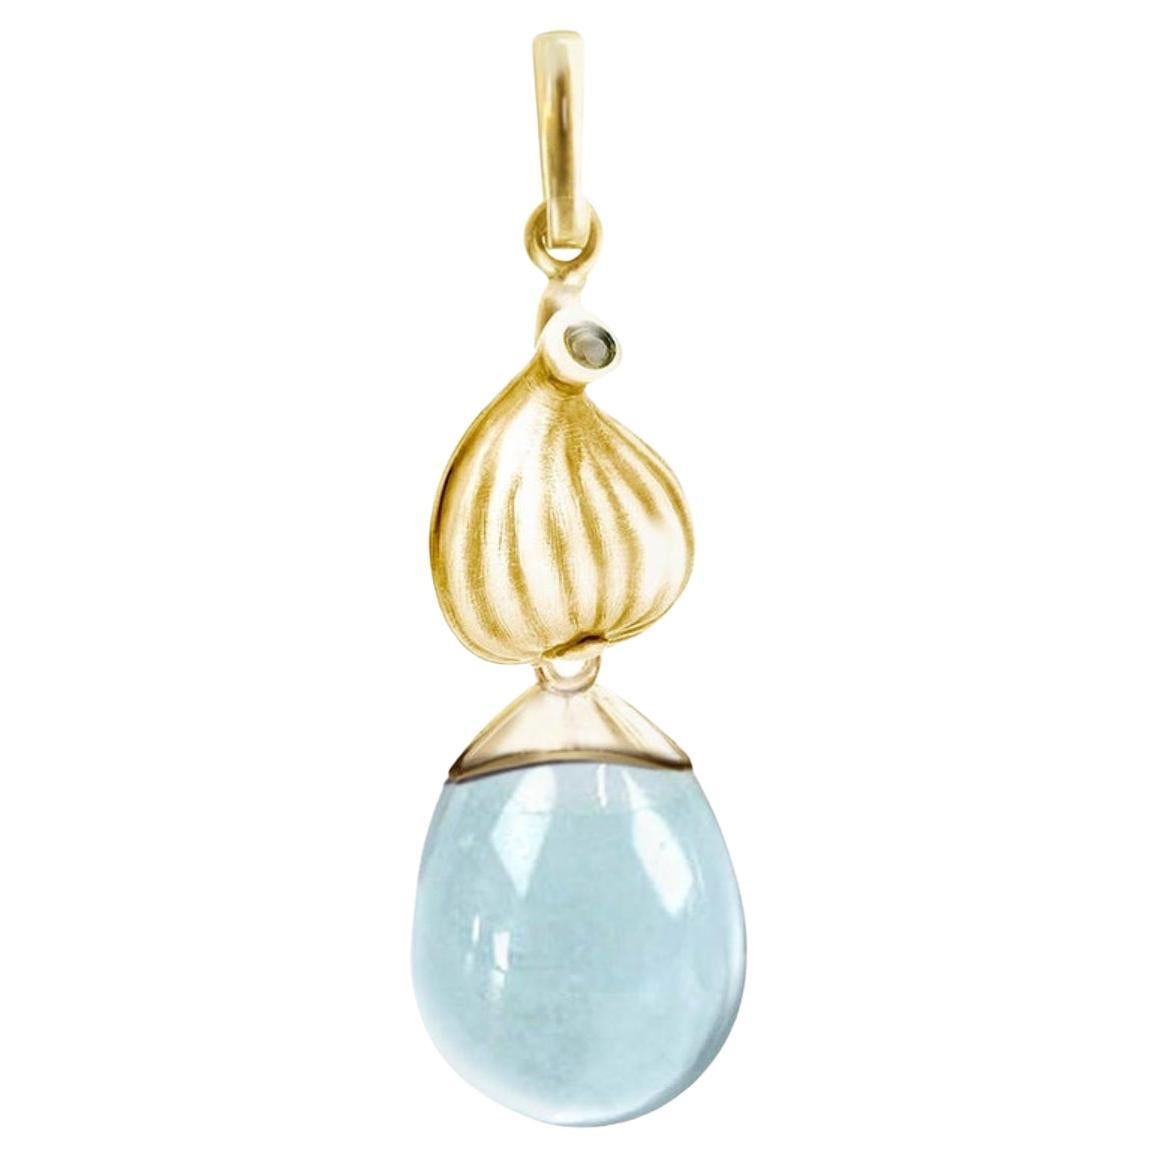 18 Karat Yellow Gold Drop Pendant Necklace with Blue Topaz by the Artist For Sale